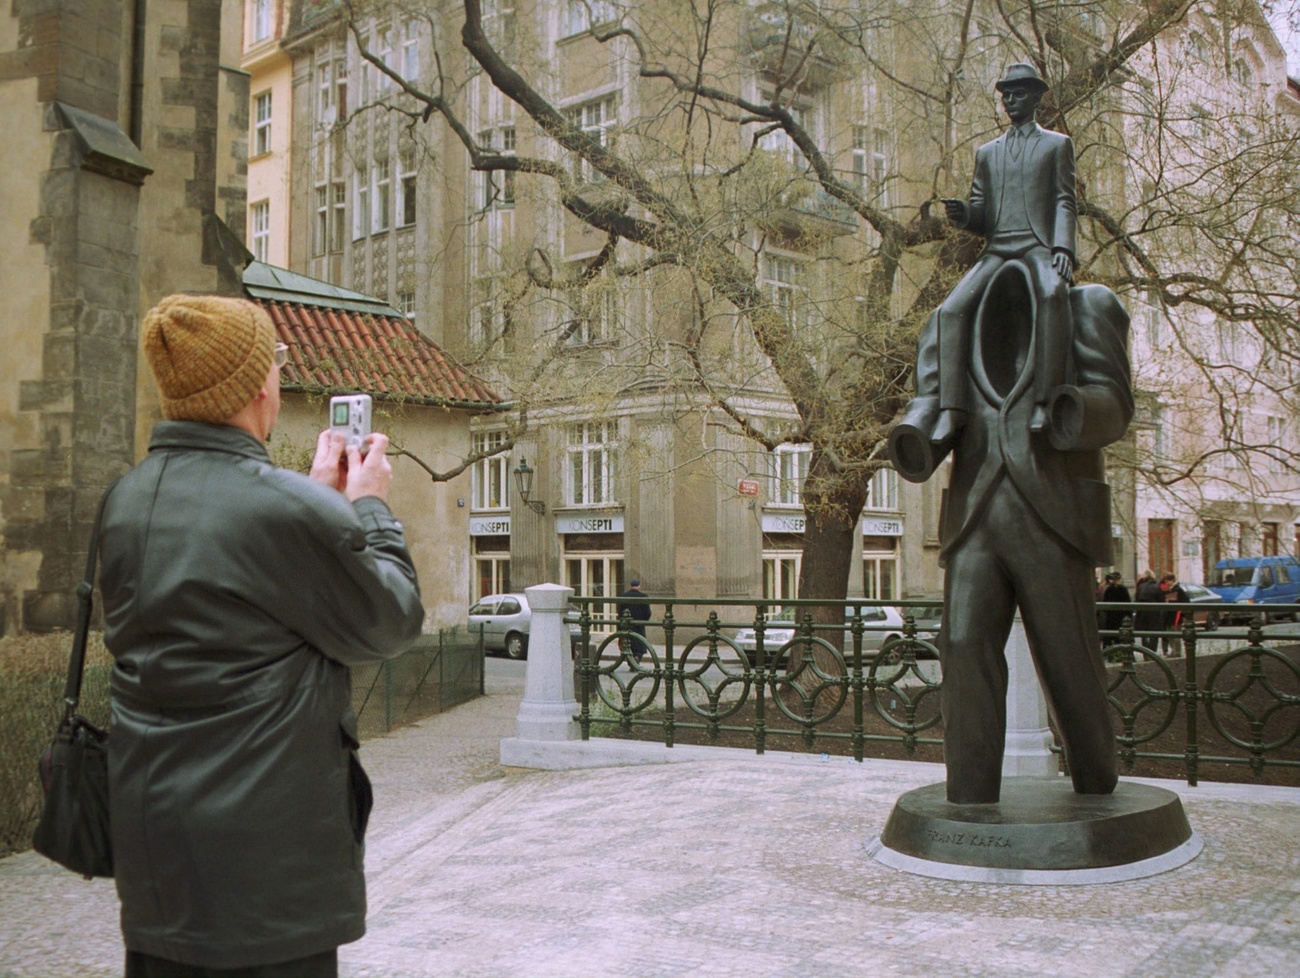 A tourist takes a photograph in the Czech Republic